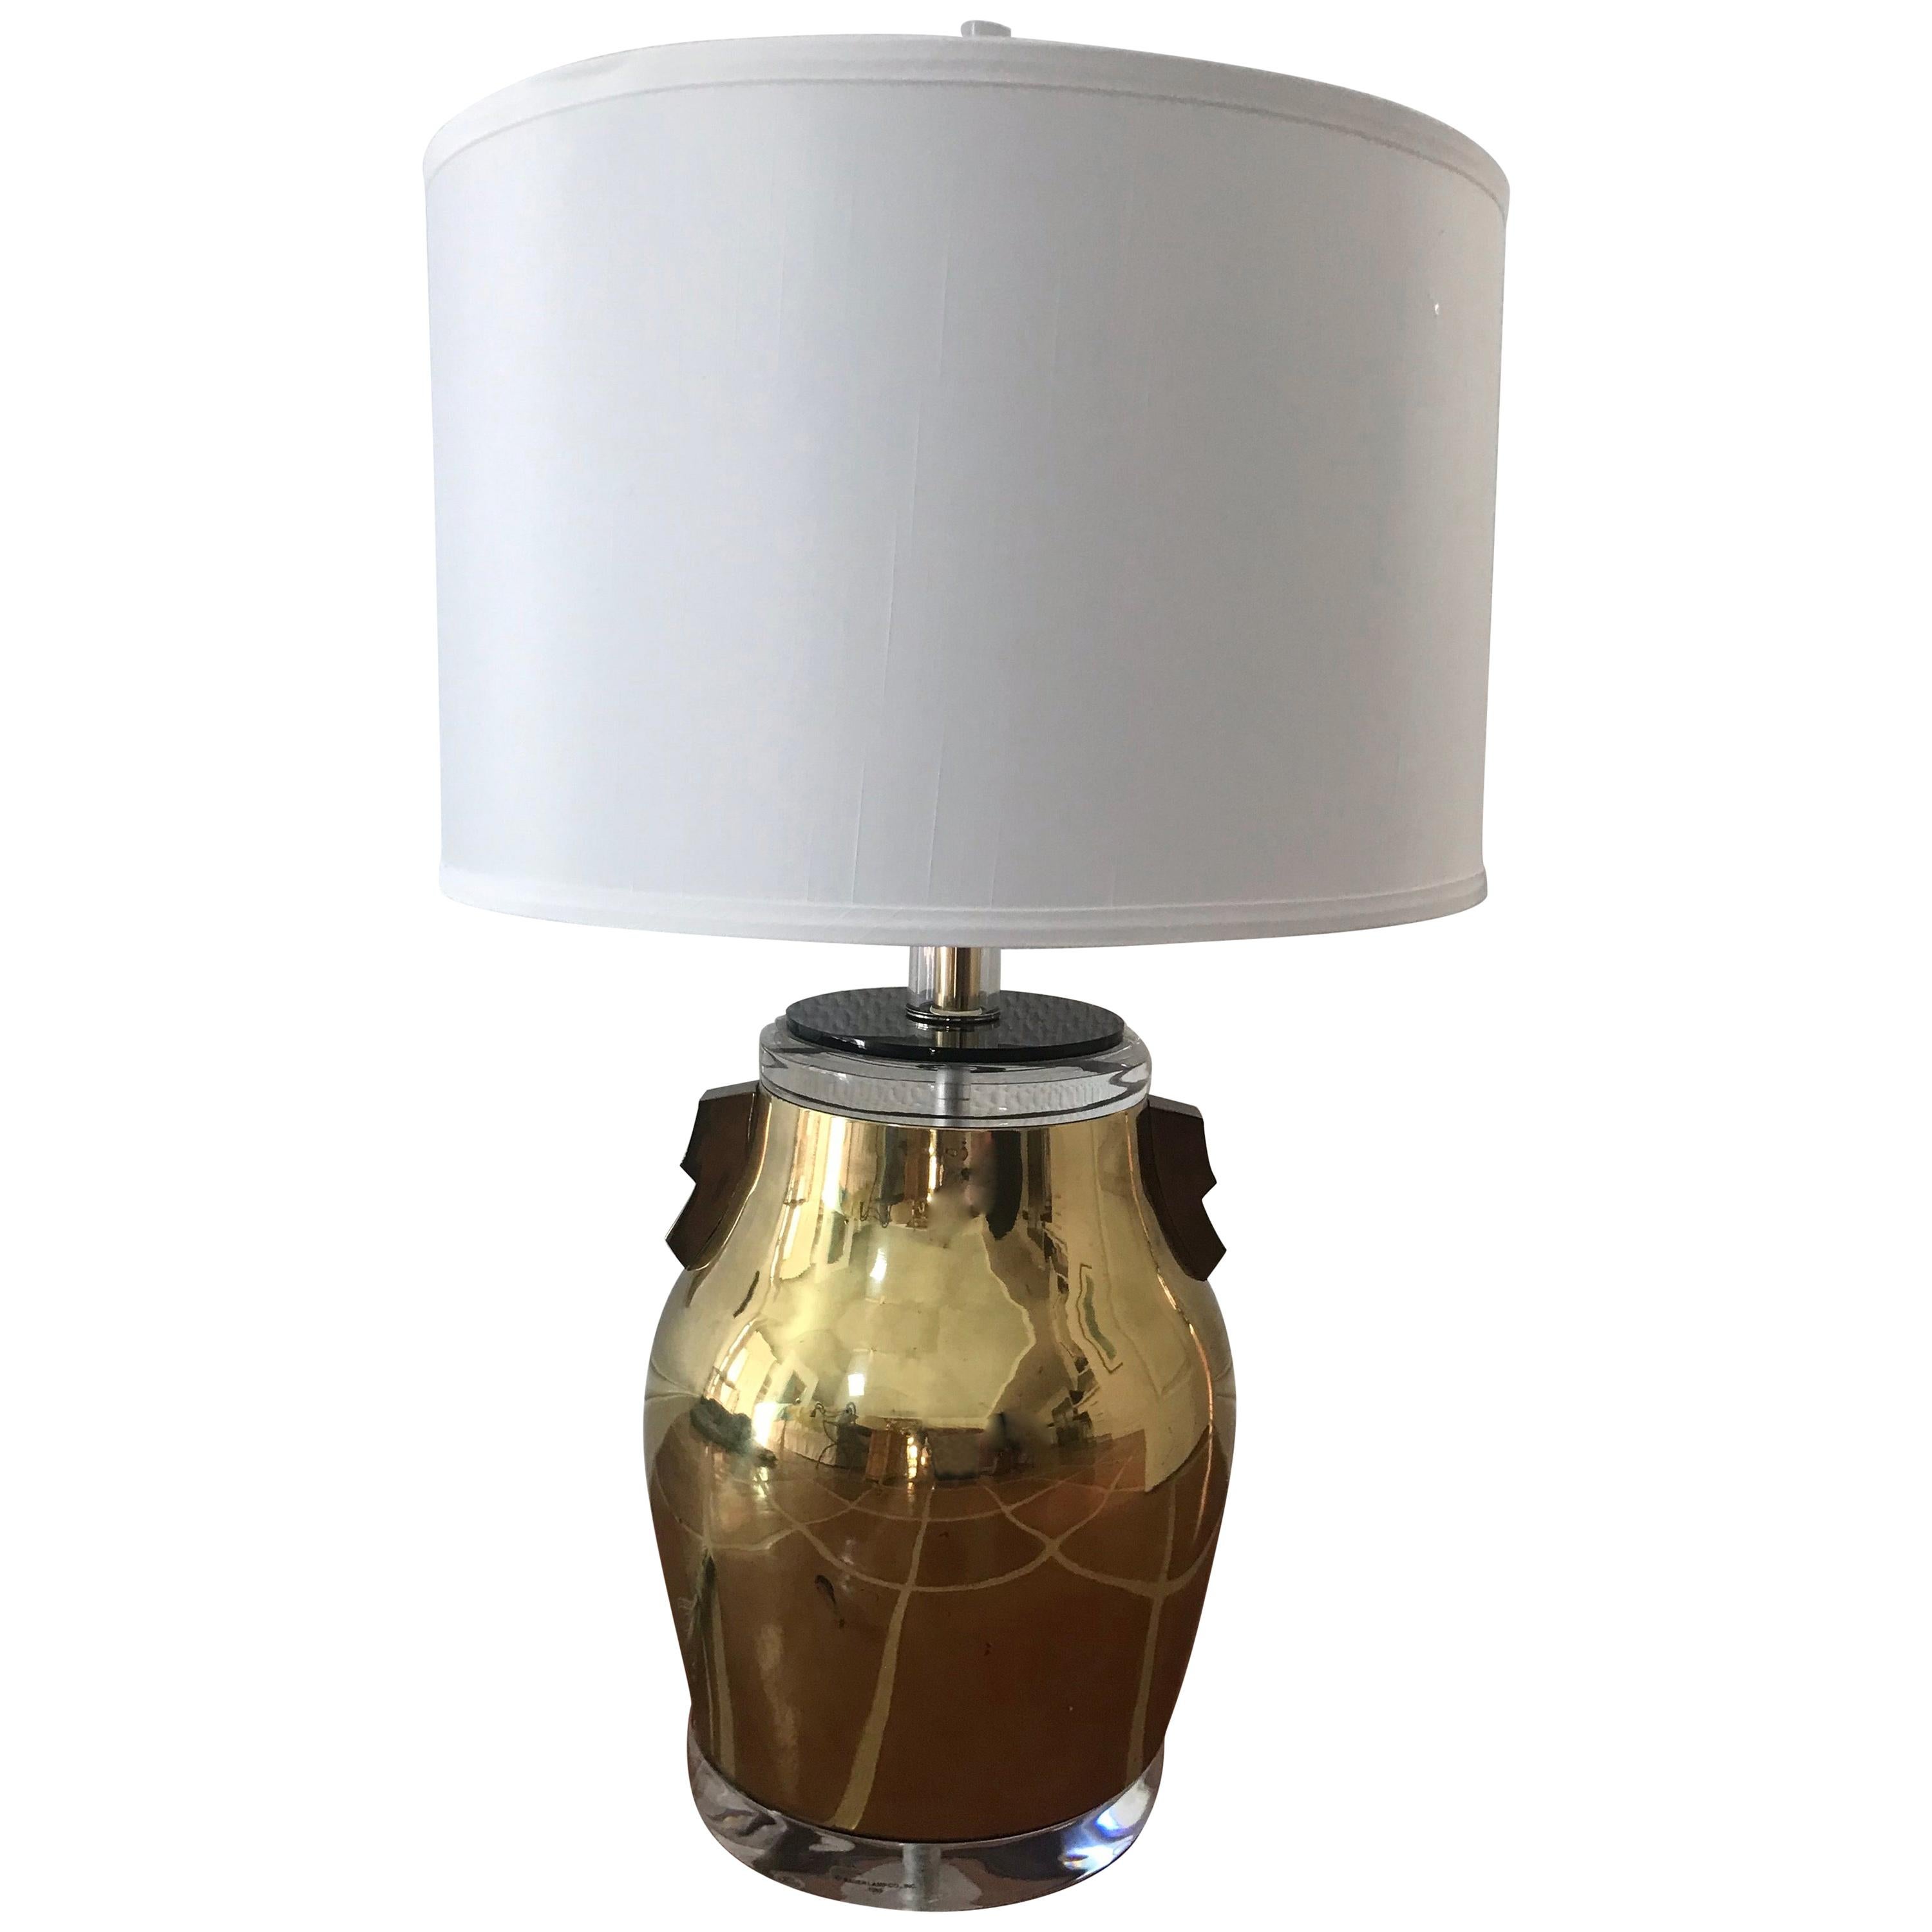 Bauer Brass and Lucite Asian Inspired Lamp